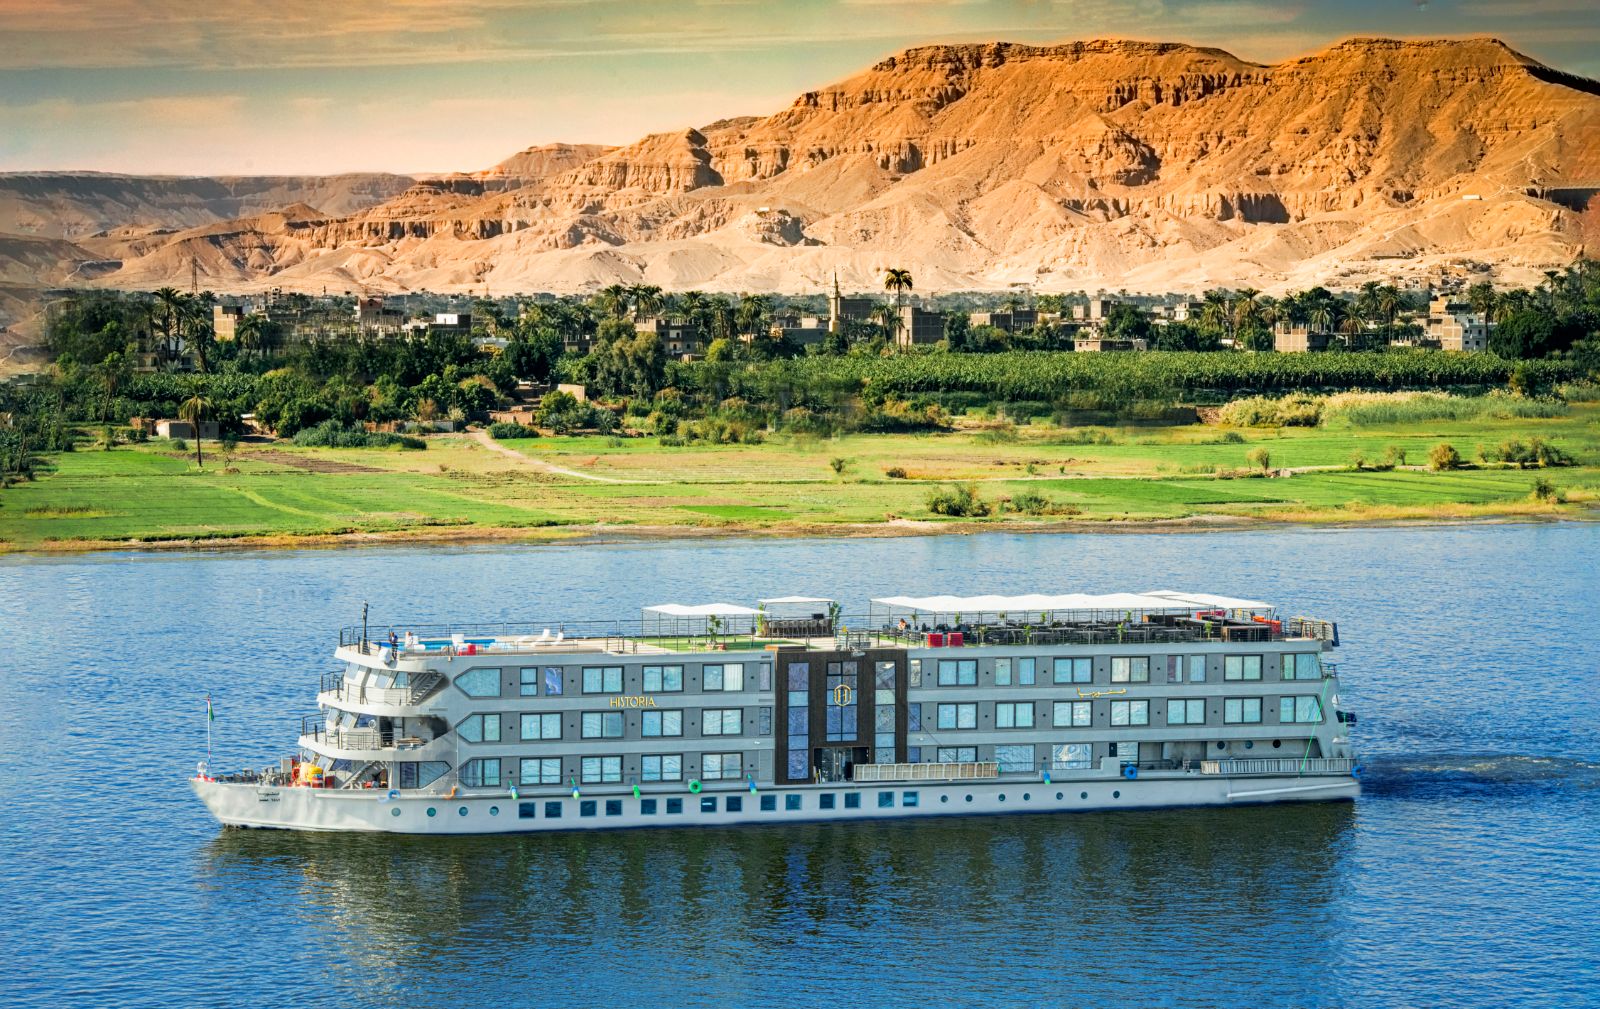 The Historia cruise boat on the Nile in Egypt